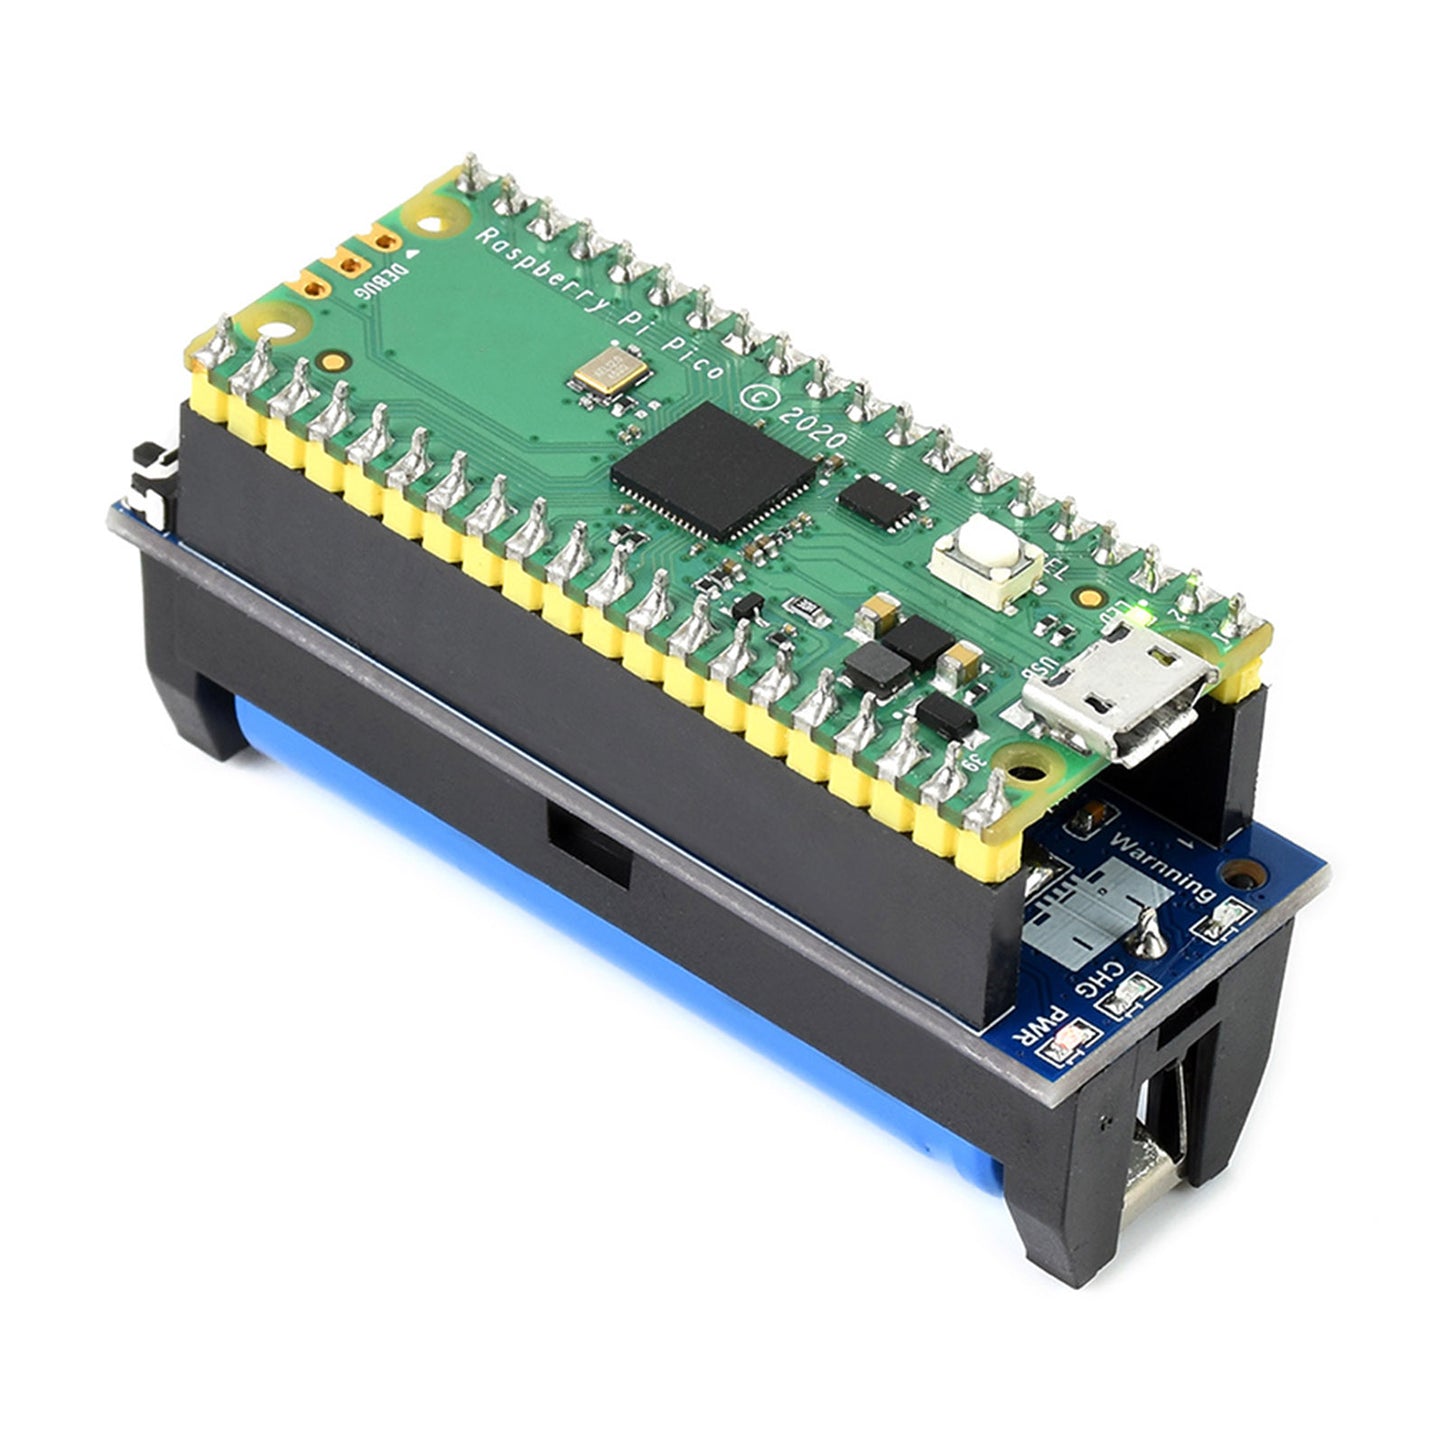 800Mah Pico Ups Uninterruptible Power Supply Expansion Board For Raspberry Pi